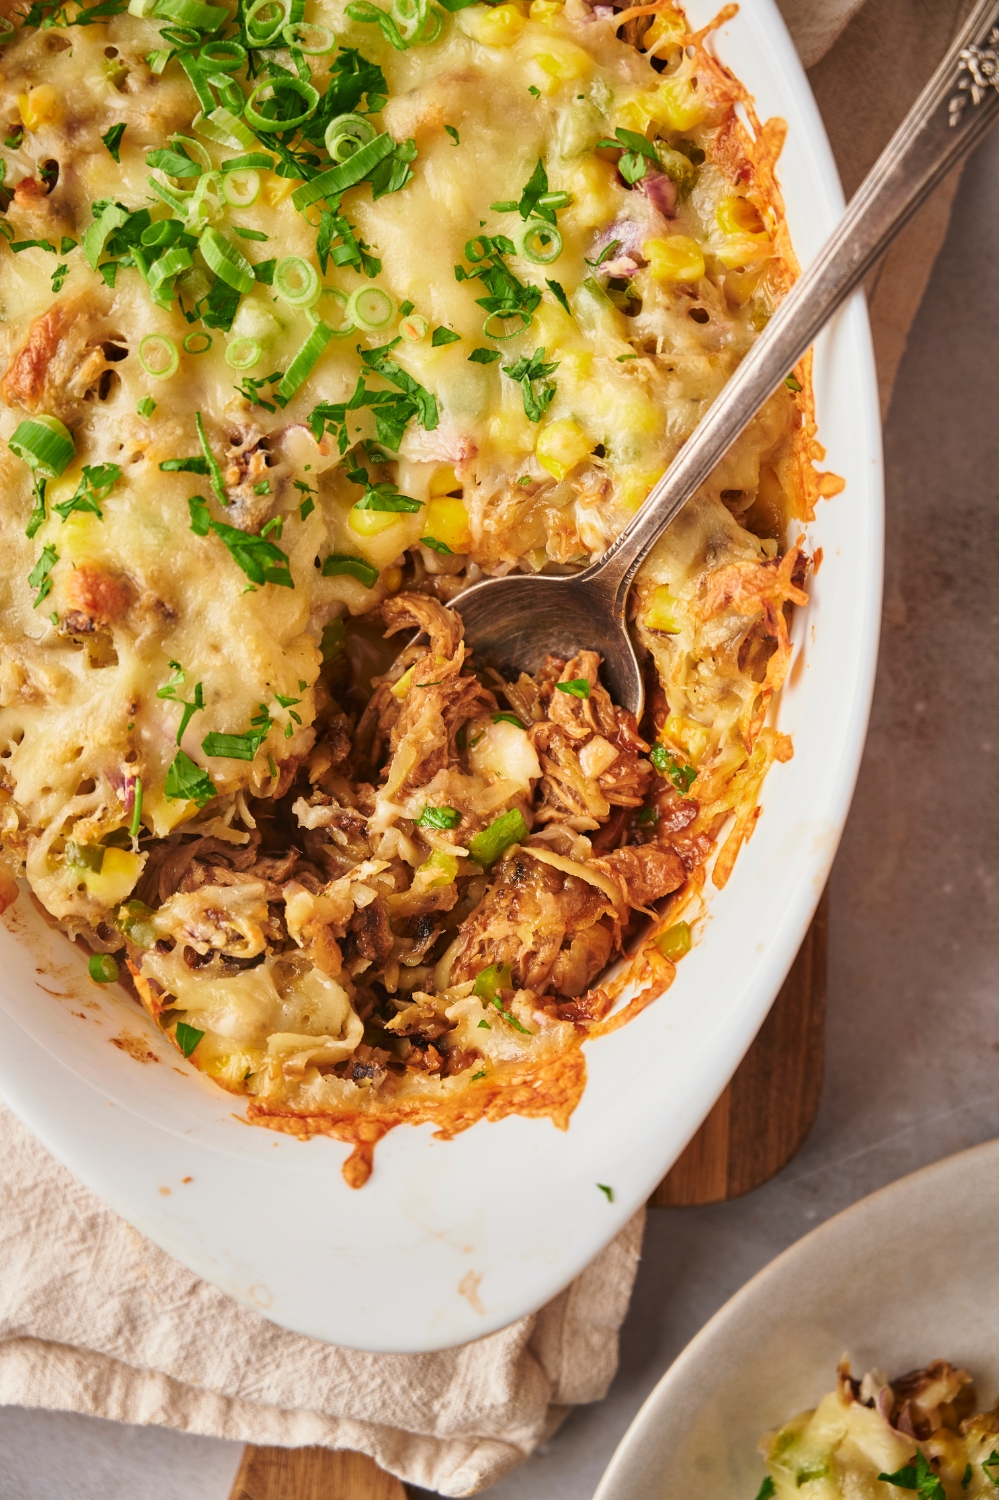 Pulled pork casserole in a white casserole dish with a serving spoon and a large serving missing from the casserole.